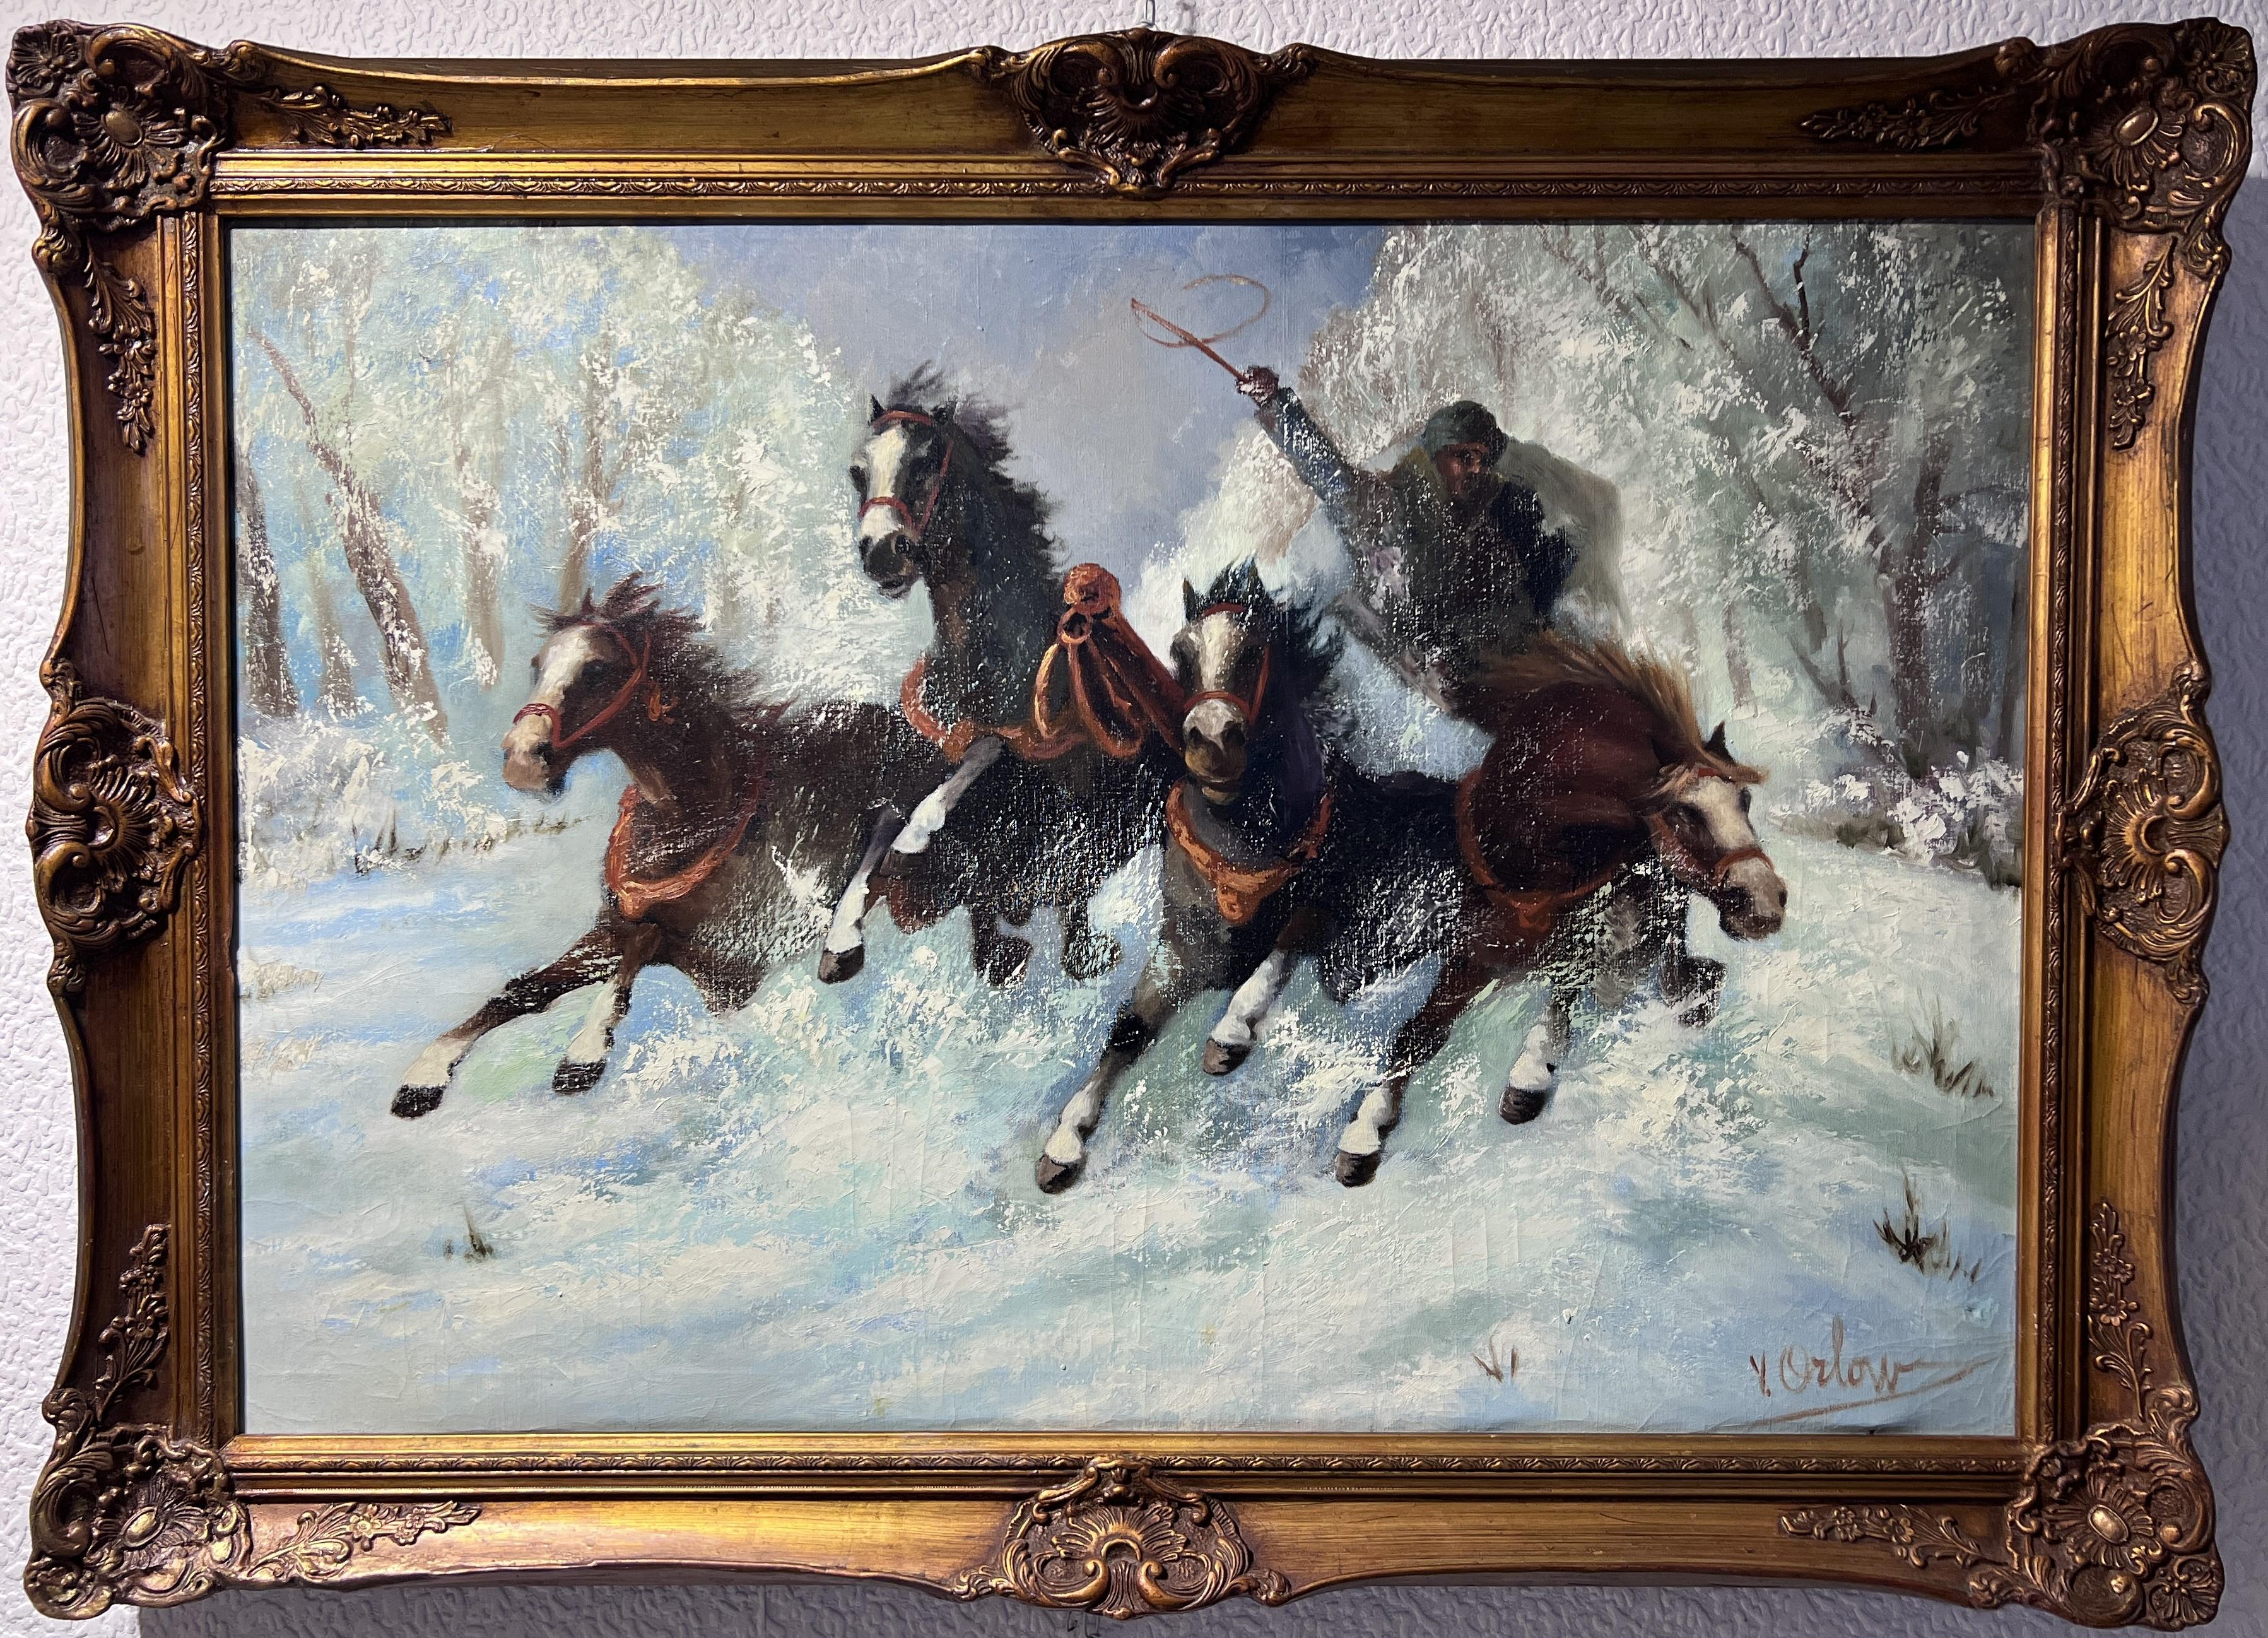 Up for sale is an impressive vintage oil painting on canvas depicting a scene with a coachman racing four horses in a harness in a winter landscape.

Signed in the lower-right corner V.Orlow. He was born in 1911 and was a Russian artist, known for